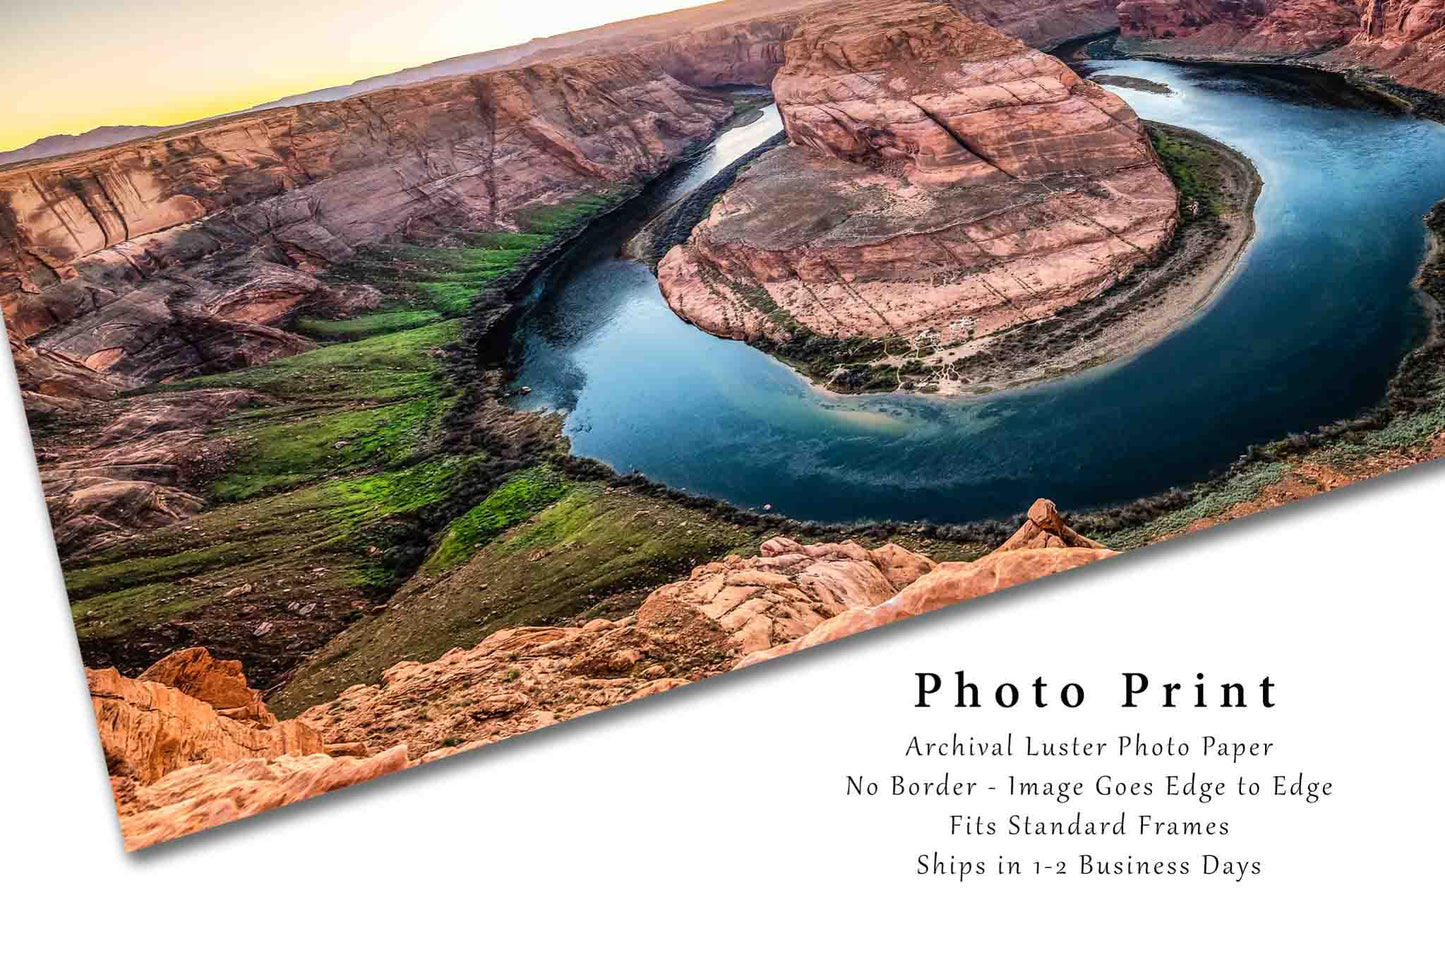 Western Photography Print (Not Framed) Picture of Horseshoe Bend at Sunset in Arizona Colorado River Wall Art Southwestern Decor